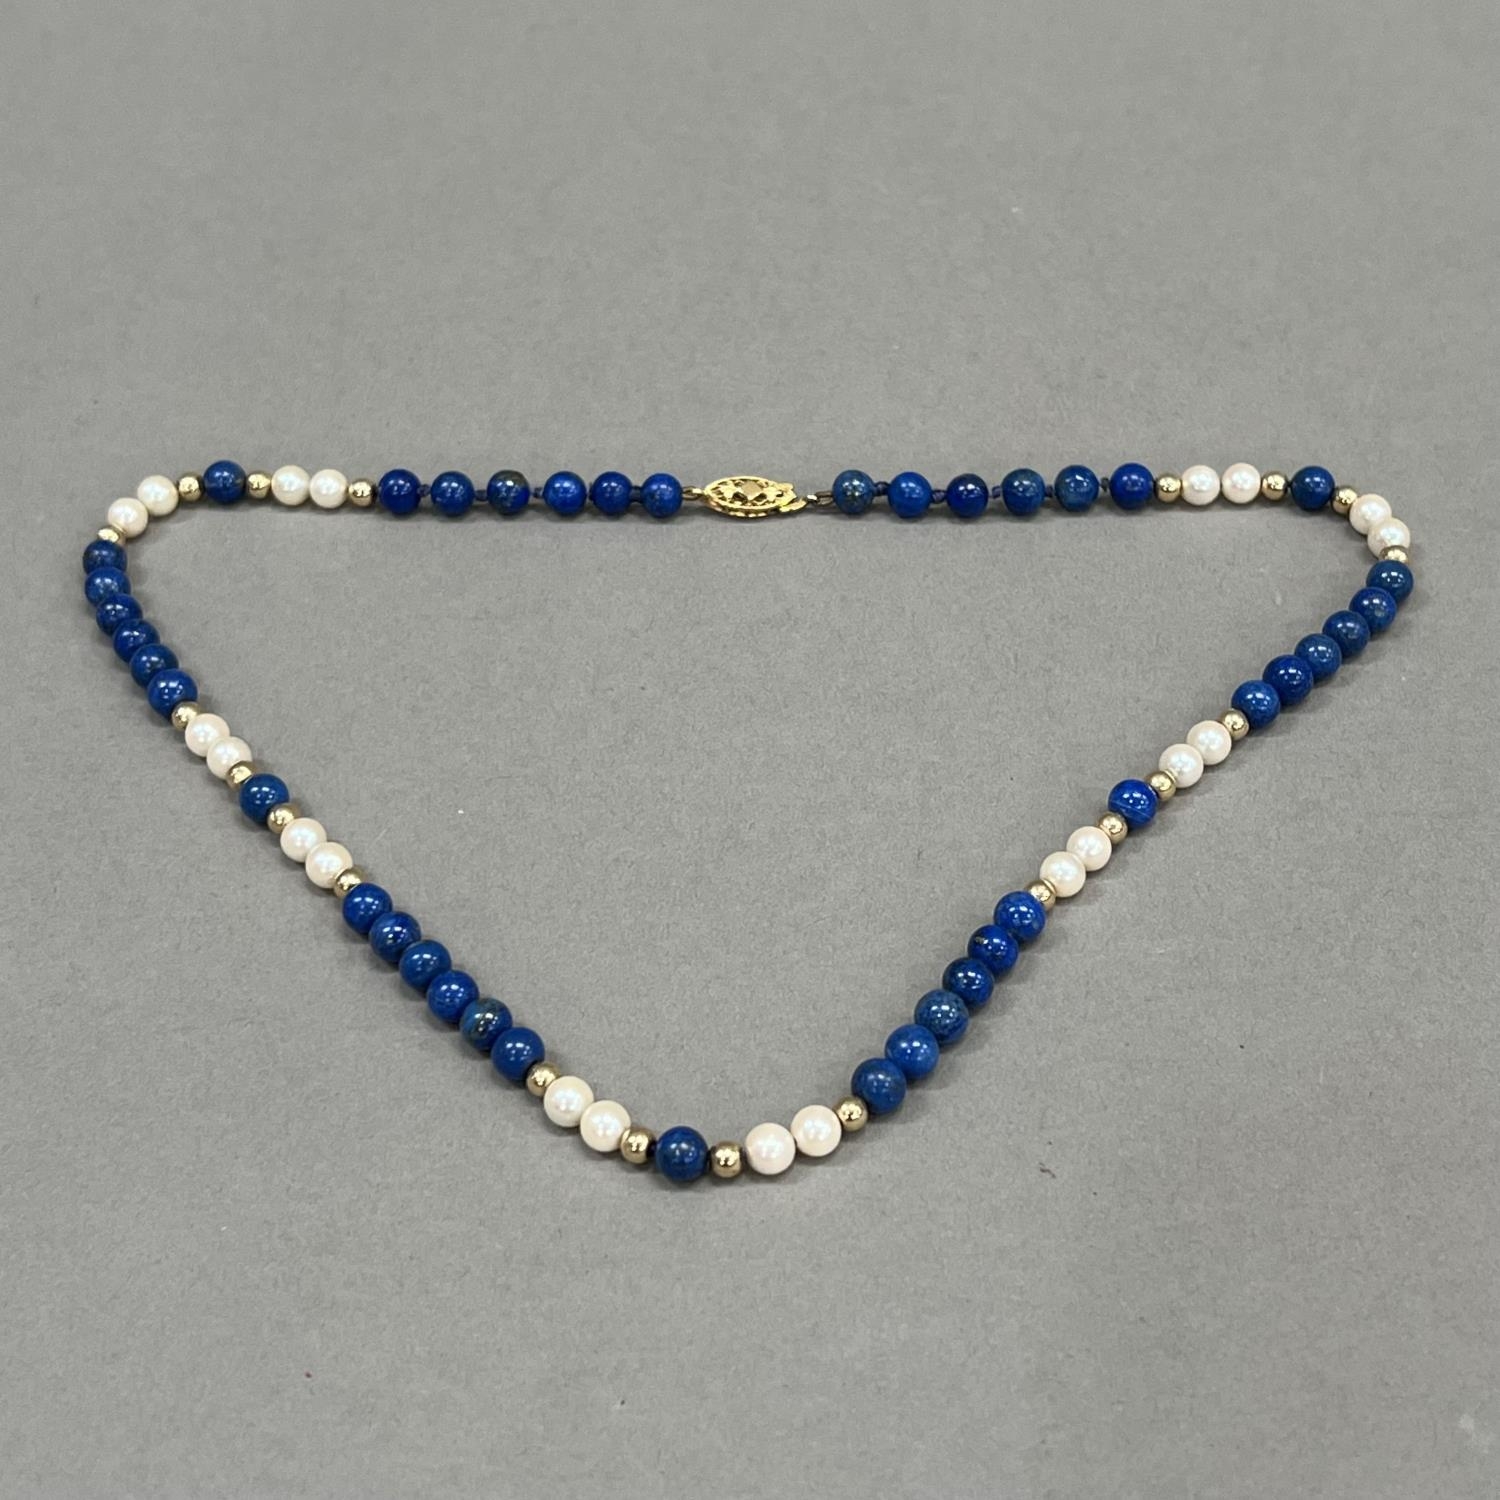 A necklace of spherical 6mm diameter Lapis Lazuli beads, 5.5mm diameter cultured pearls and 4mm